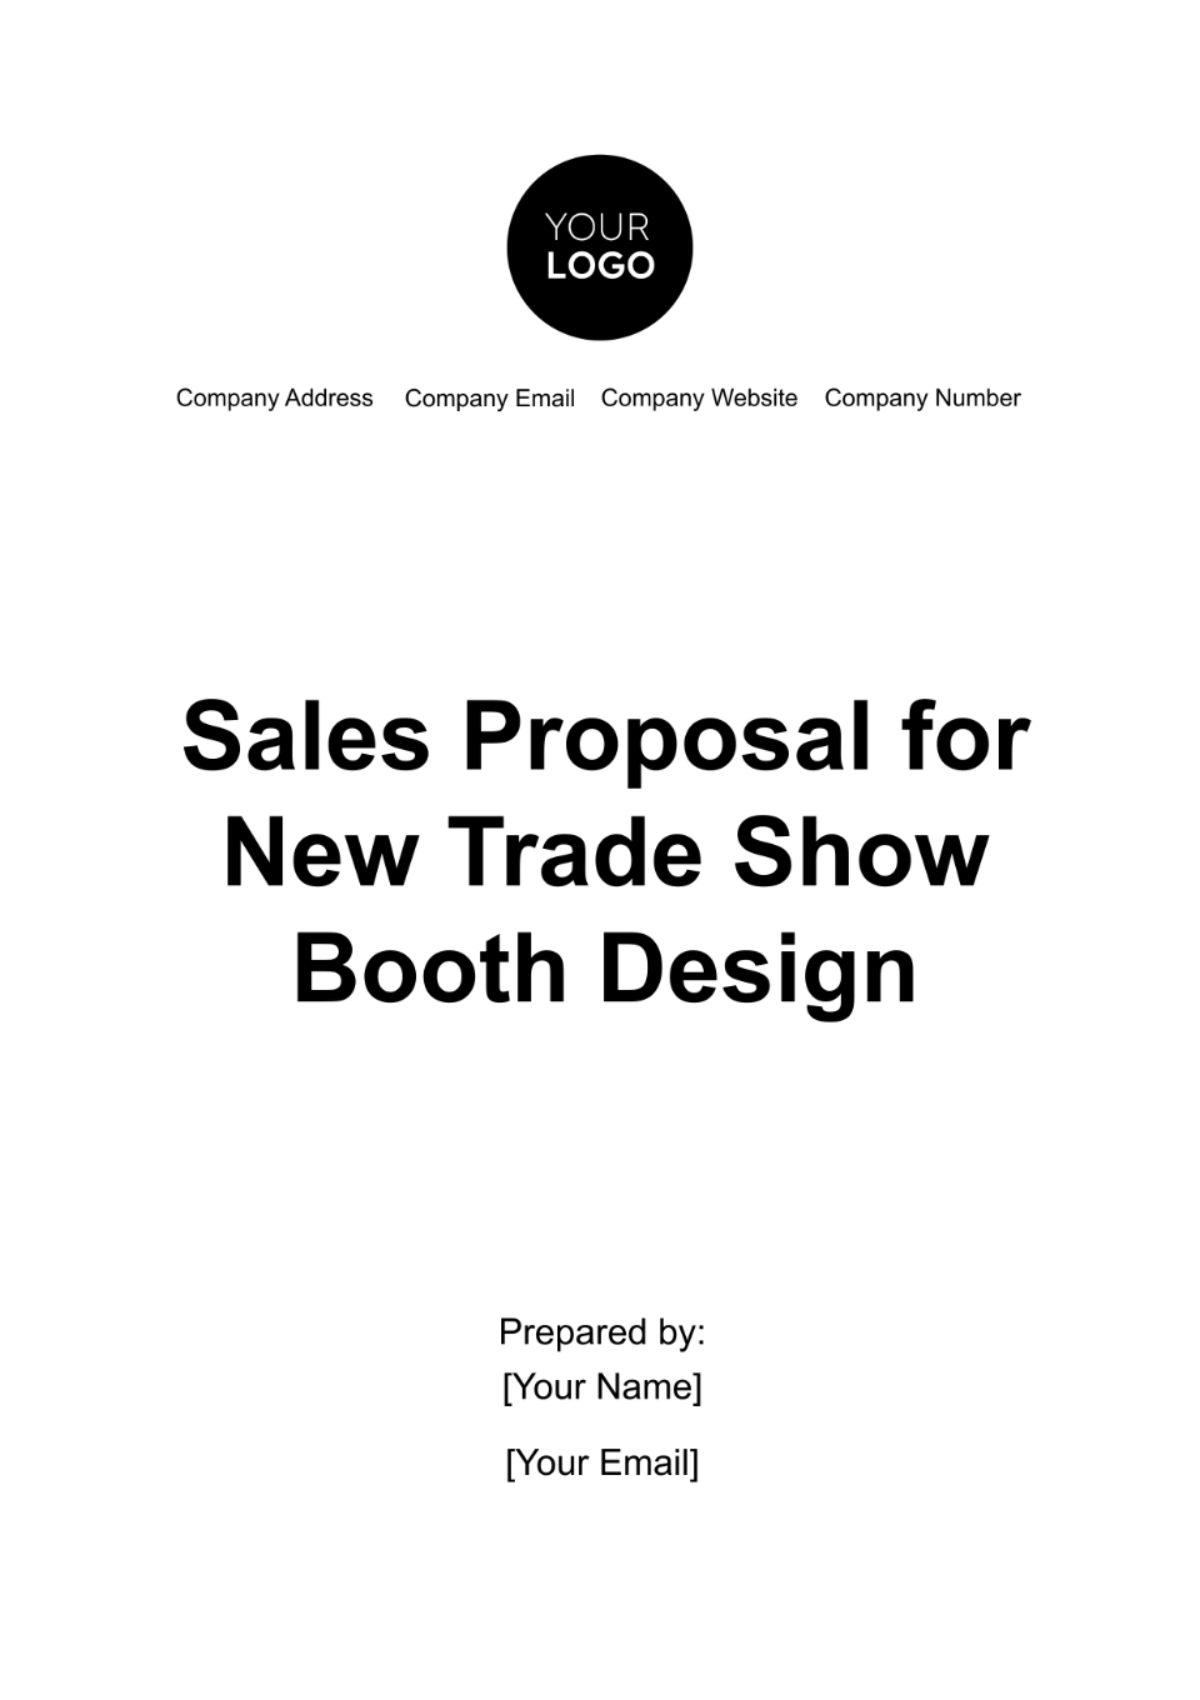 Free Sales Proposal for New Trade Show Booth Design Template